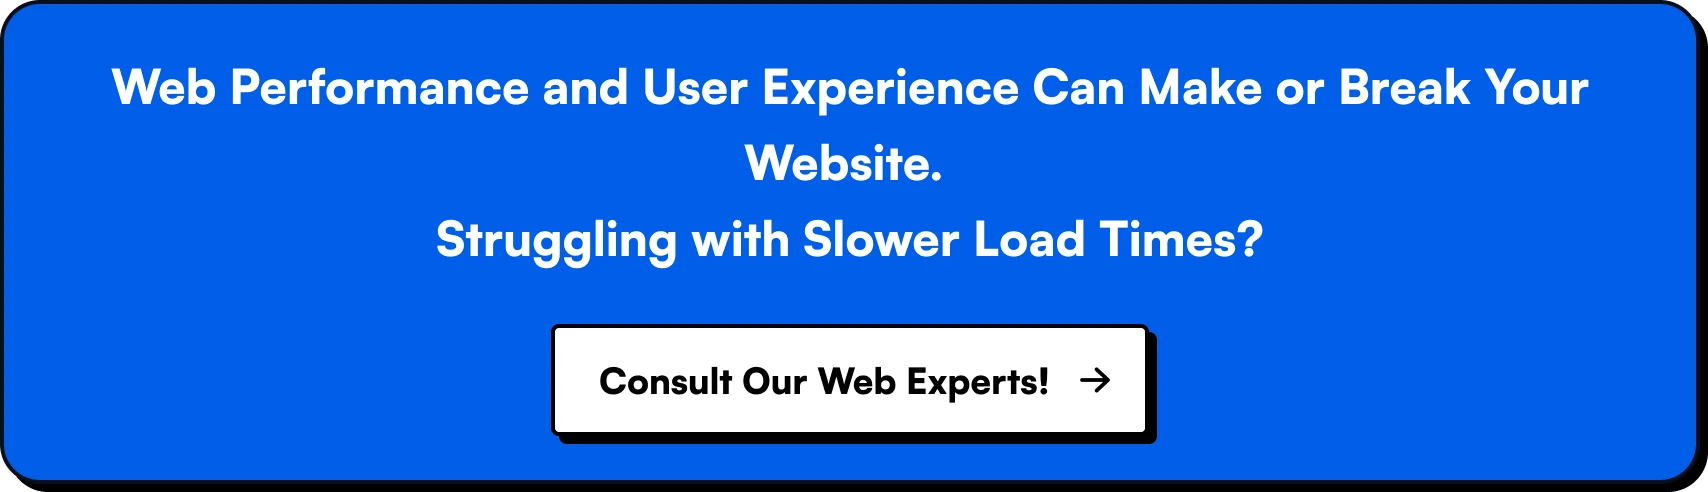 Web Performance and User Experience Can Make or Break Your Website